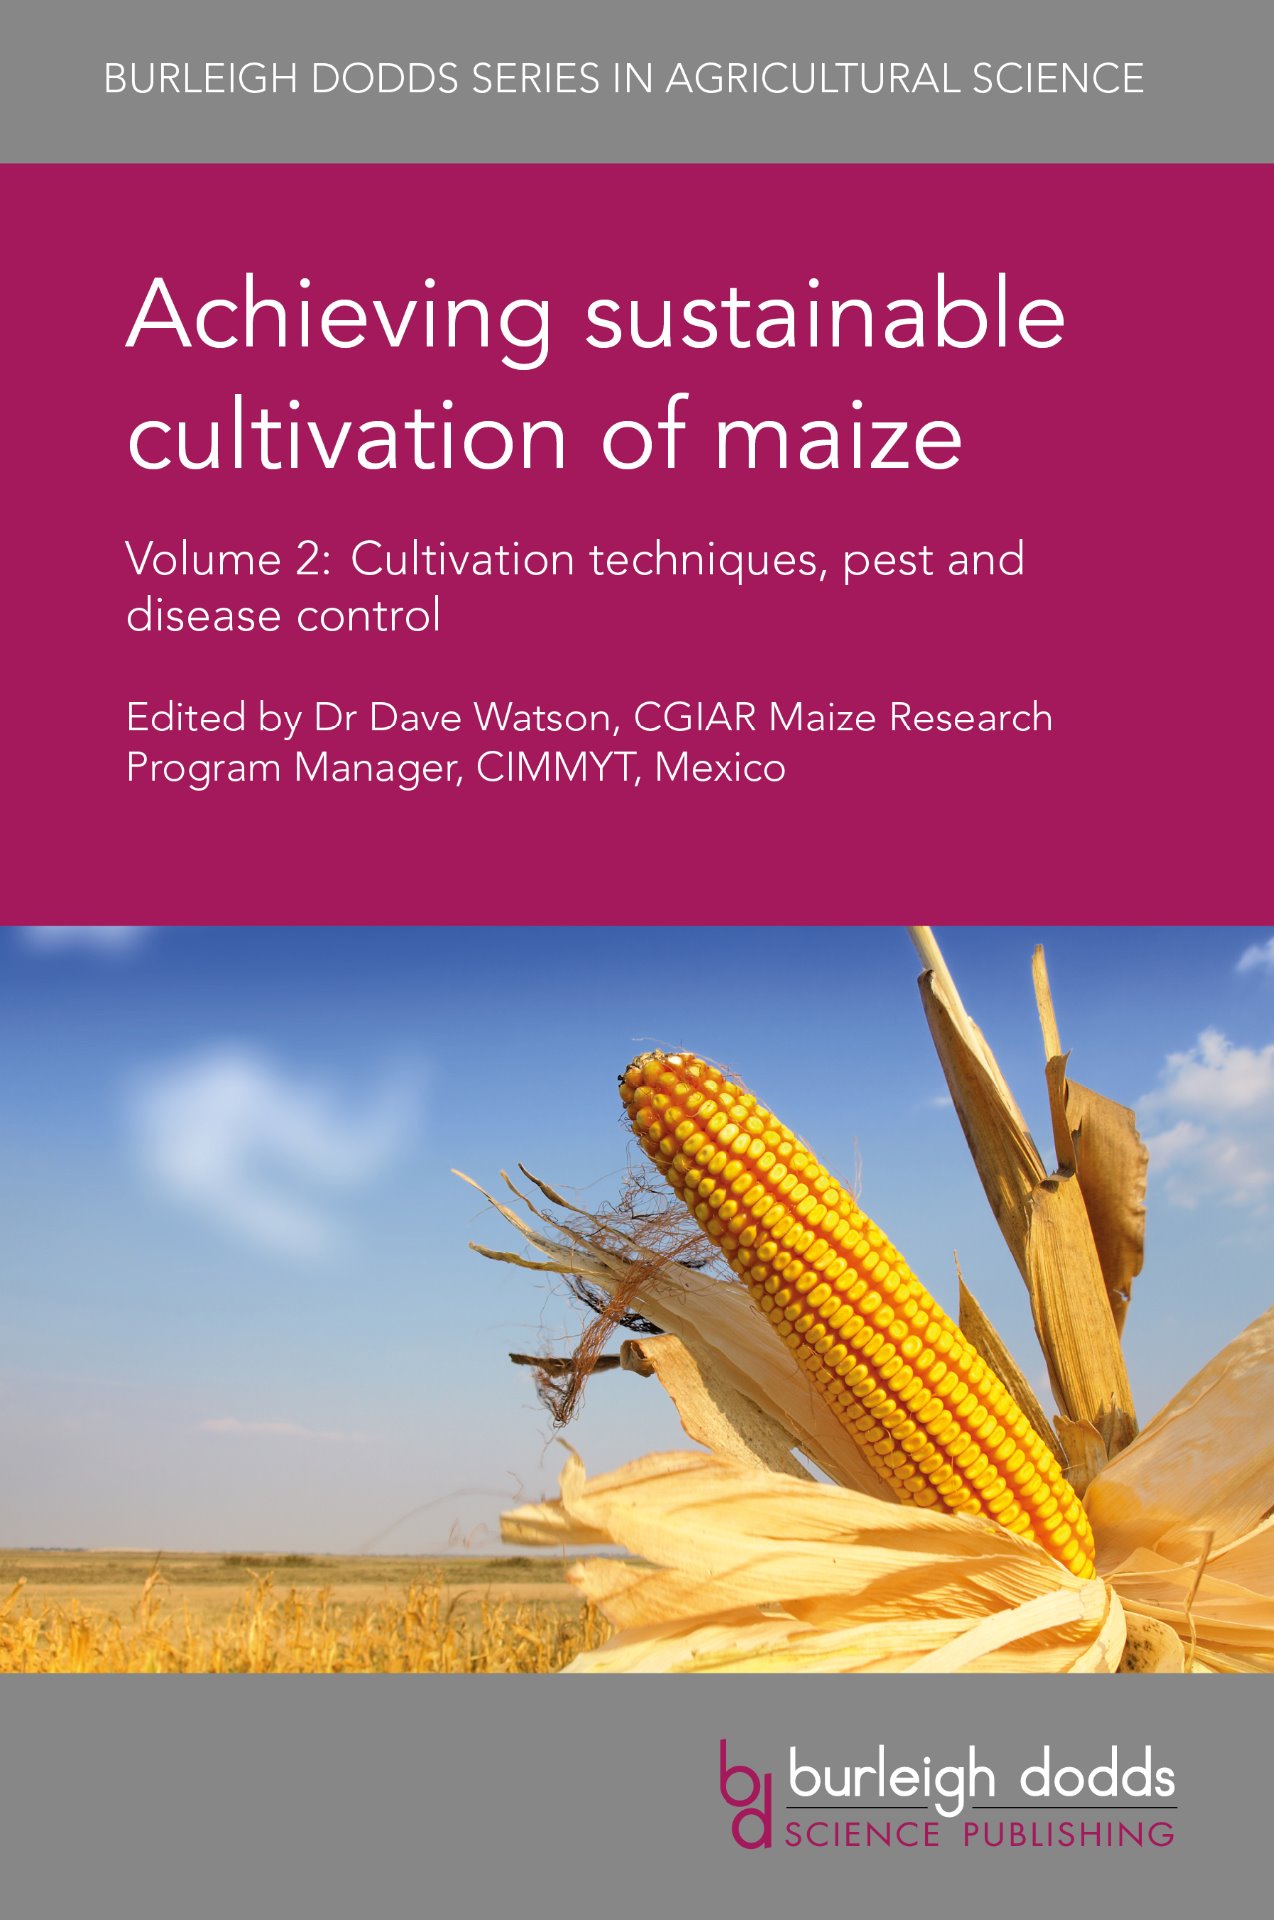 Achieving sustainable cultivation of maize Volume 2